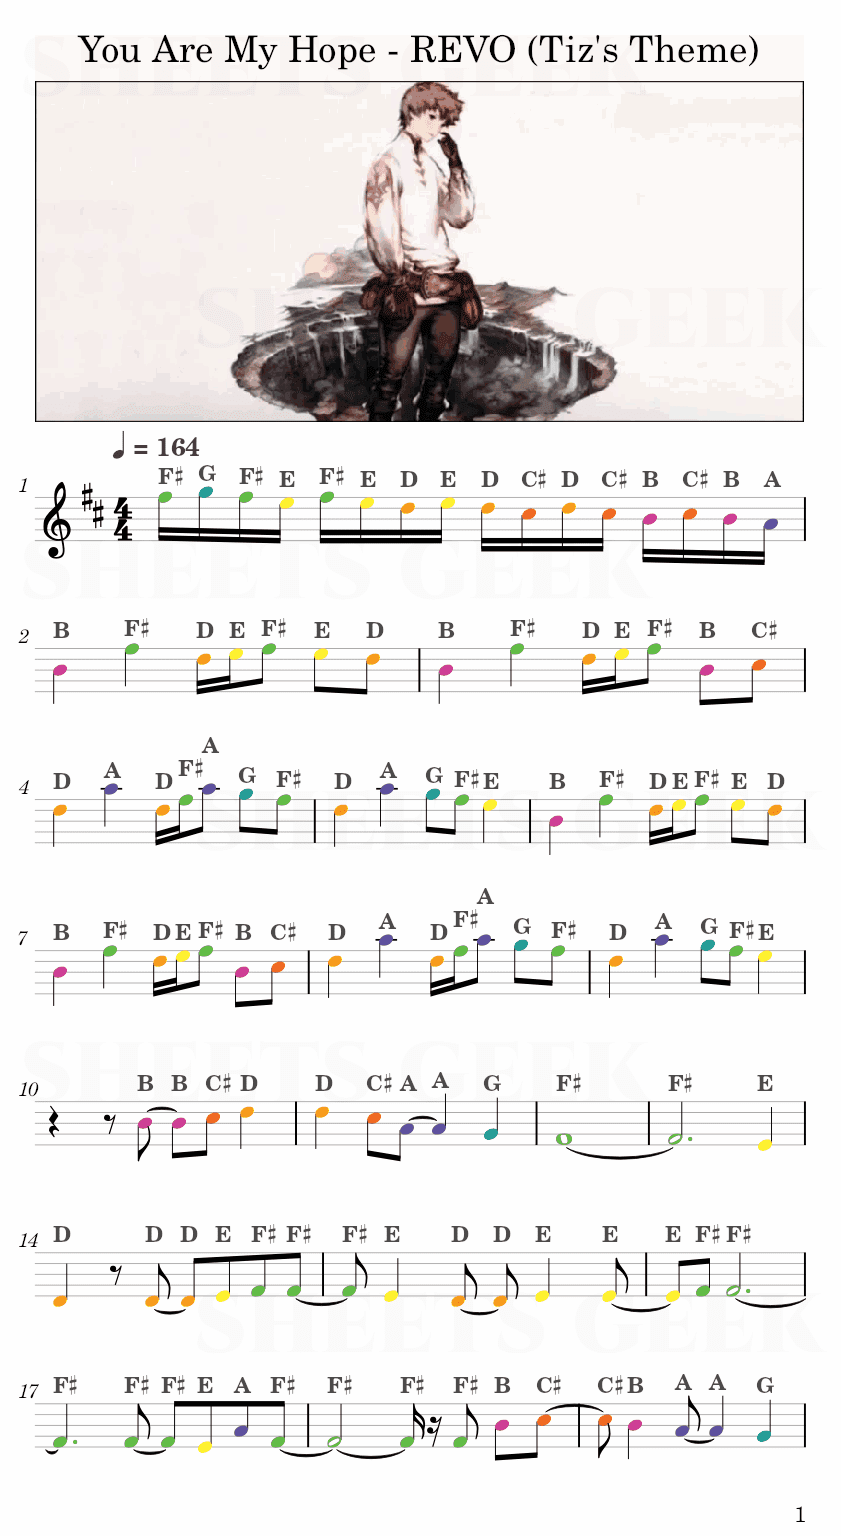 You Are My Hope - REVO Tiz's Theme from Bravely Default Easy Sheet Music Free for piano, keyboard, flute, violin, sax, cello page 1